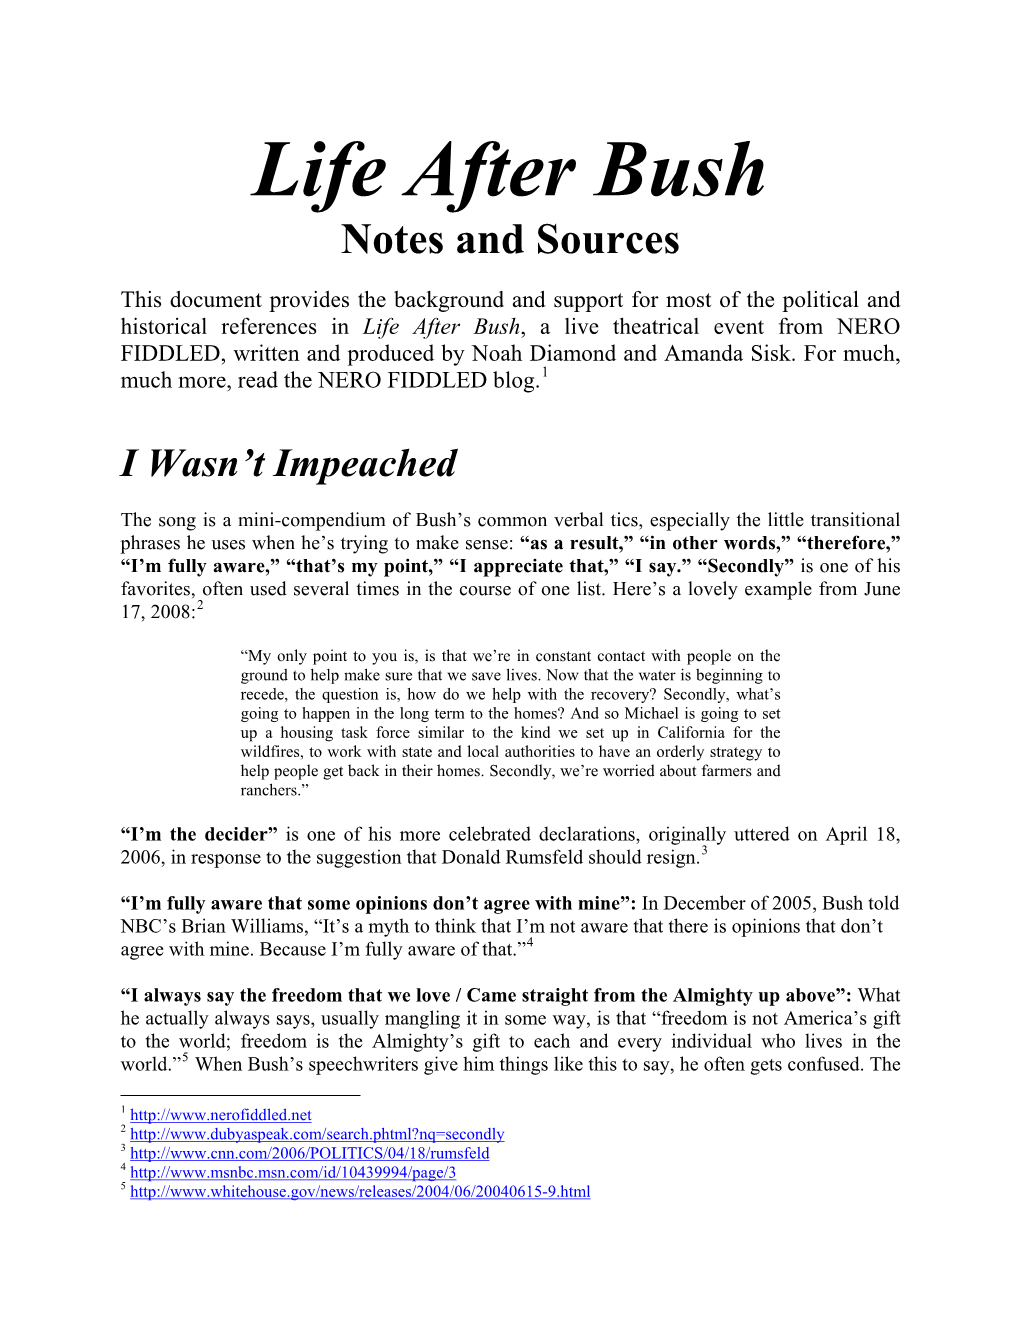 Life After Bush: Notes and Sources